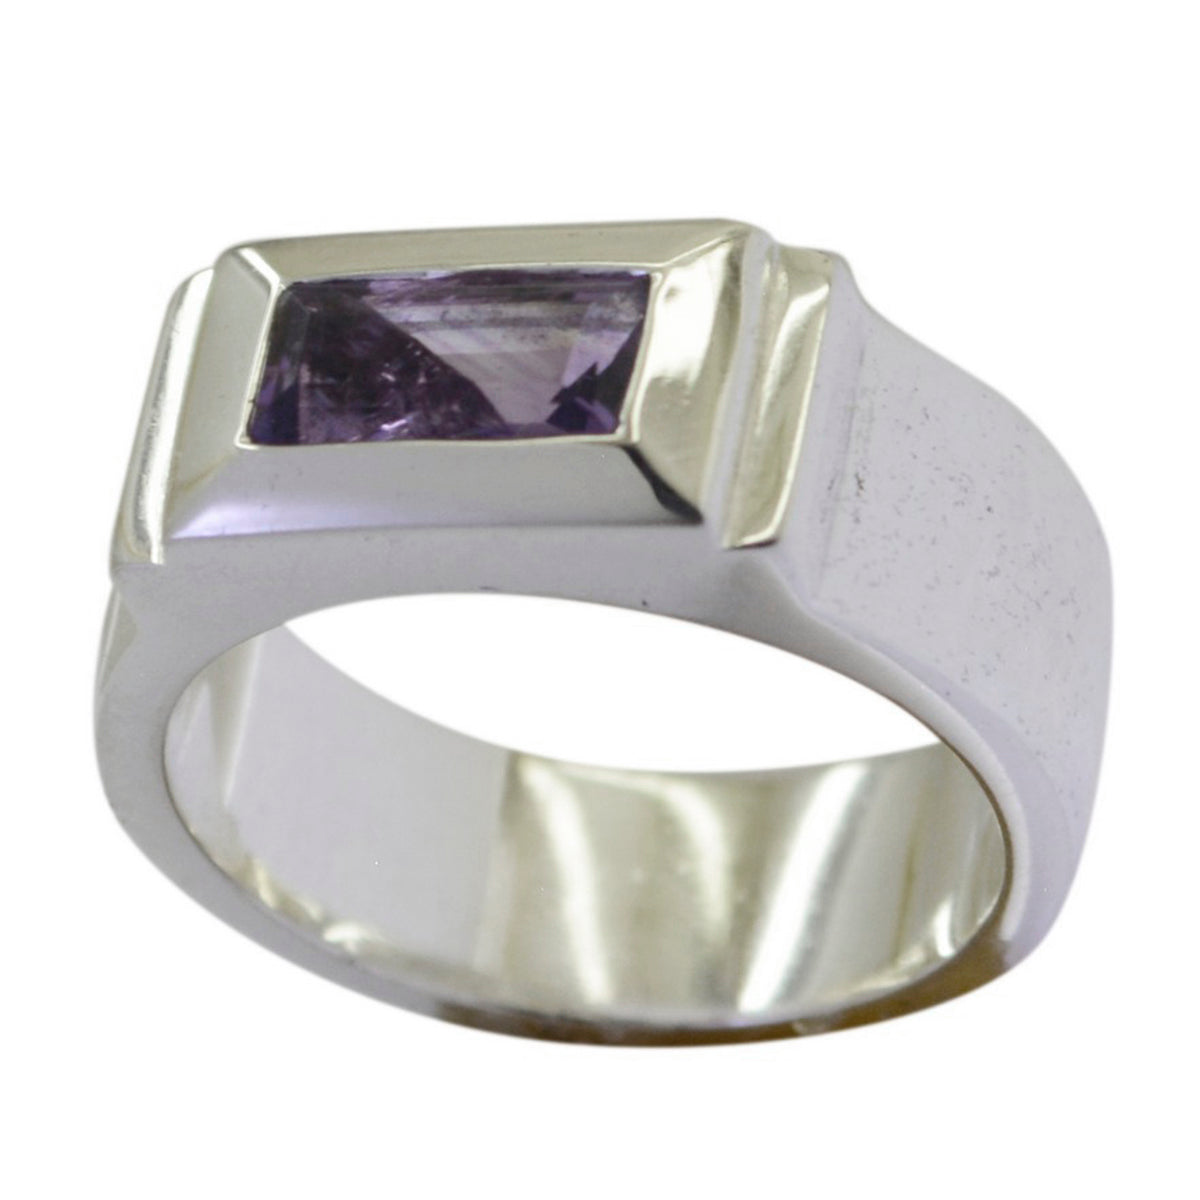 Well-Favoured Gemstone Amethyst Sterling Silver Rings Carolee Jewelry